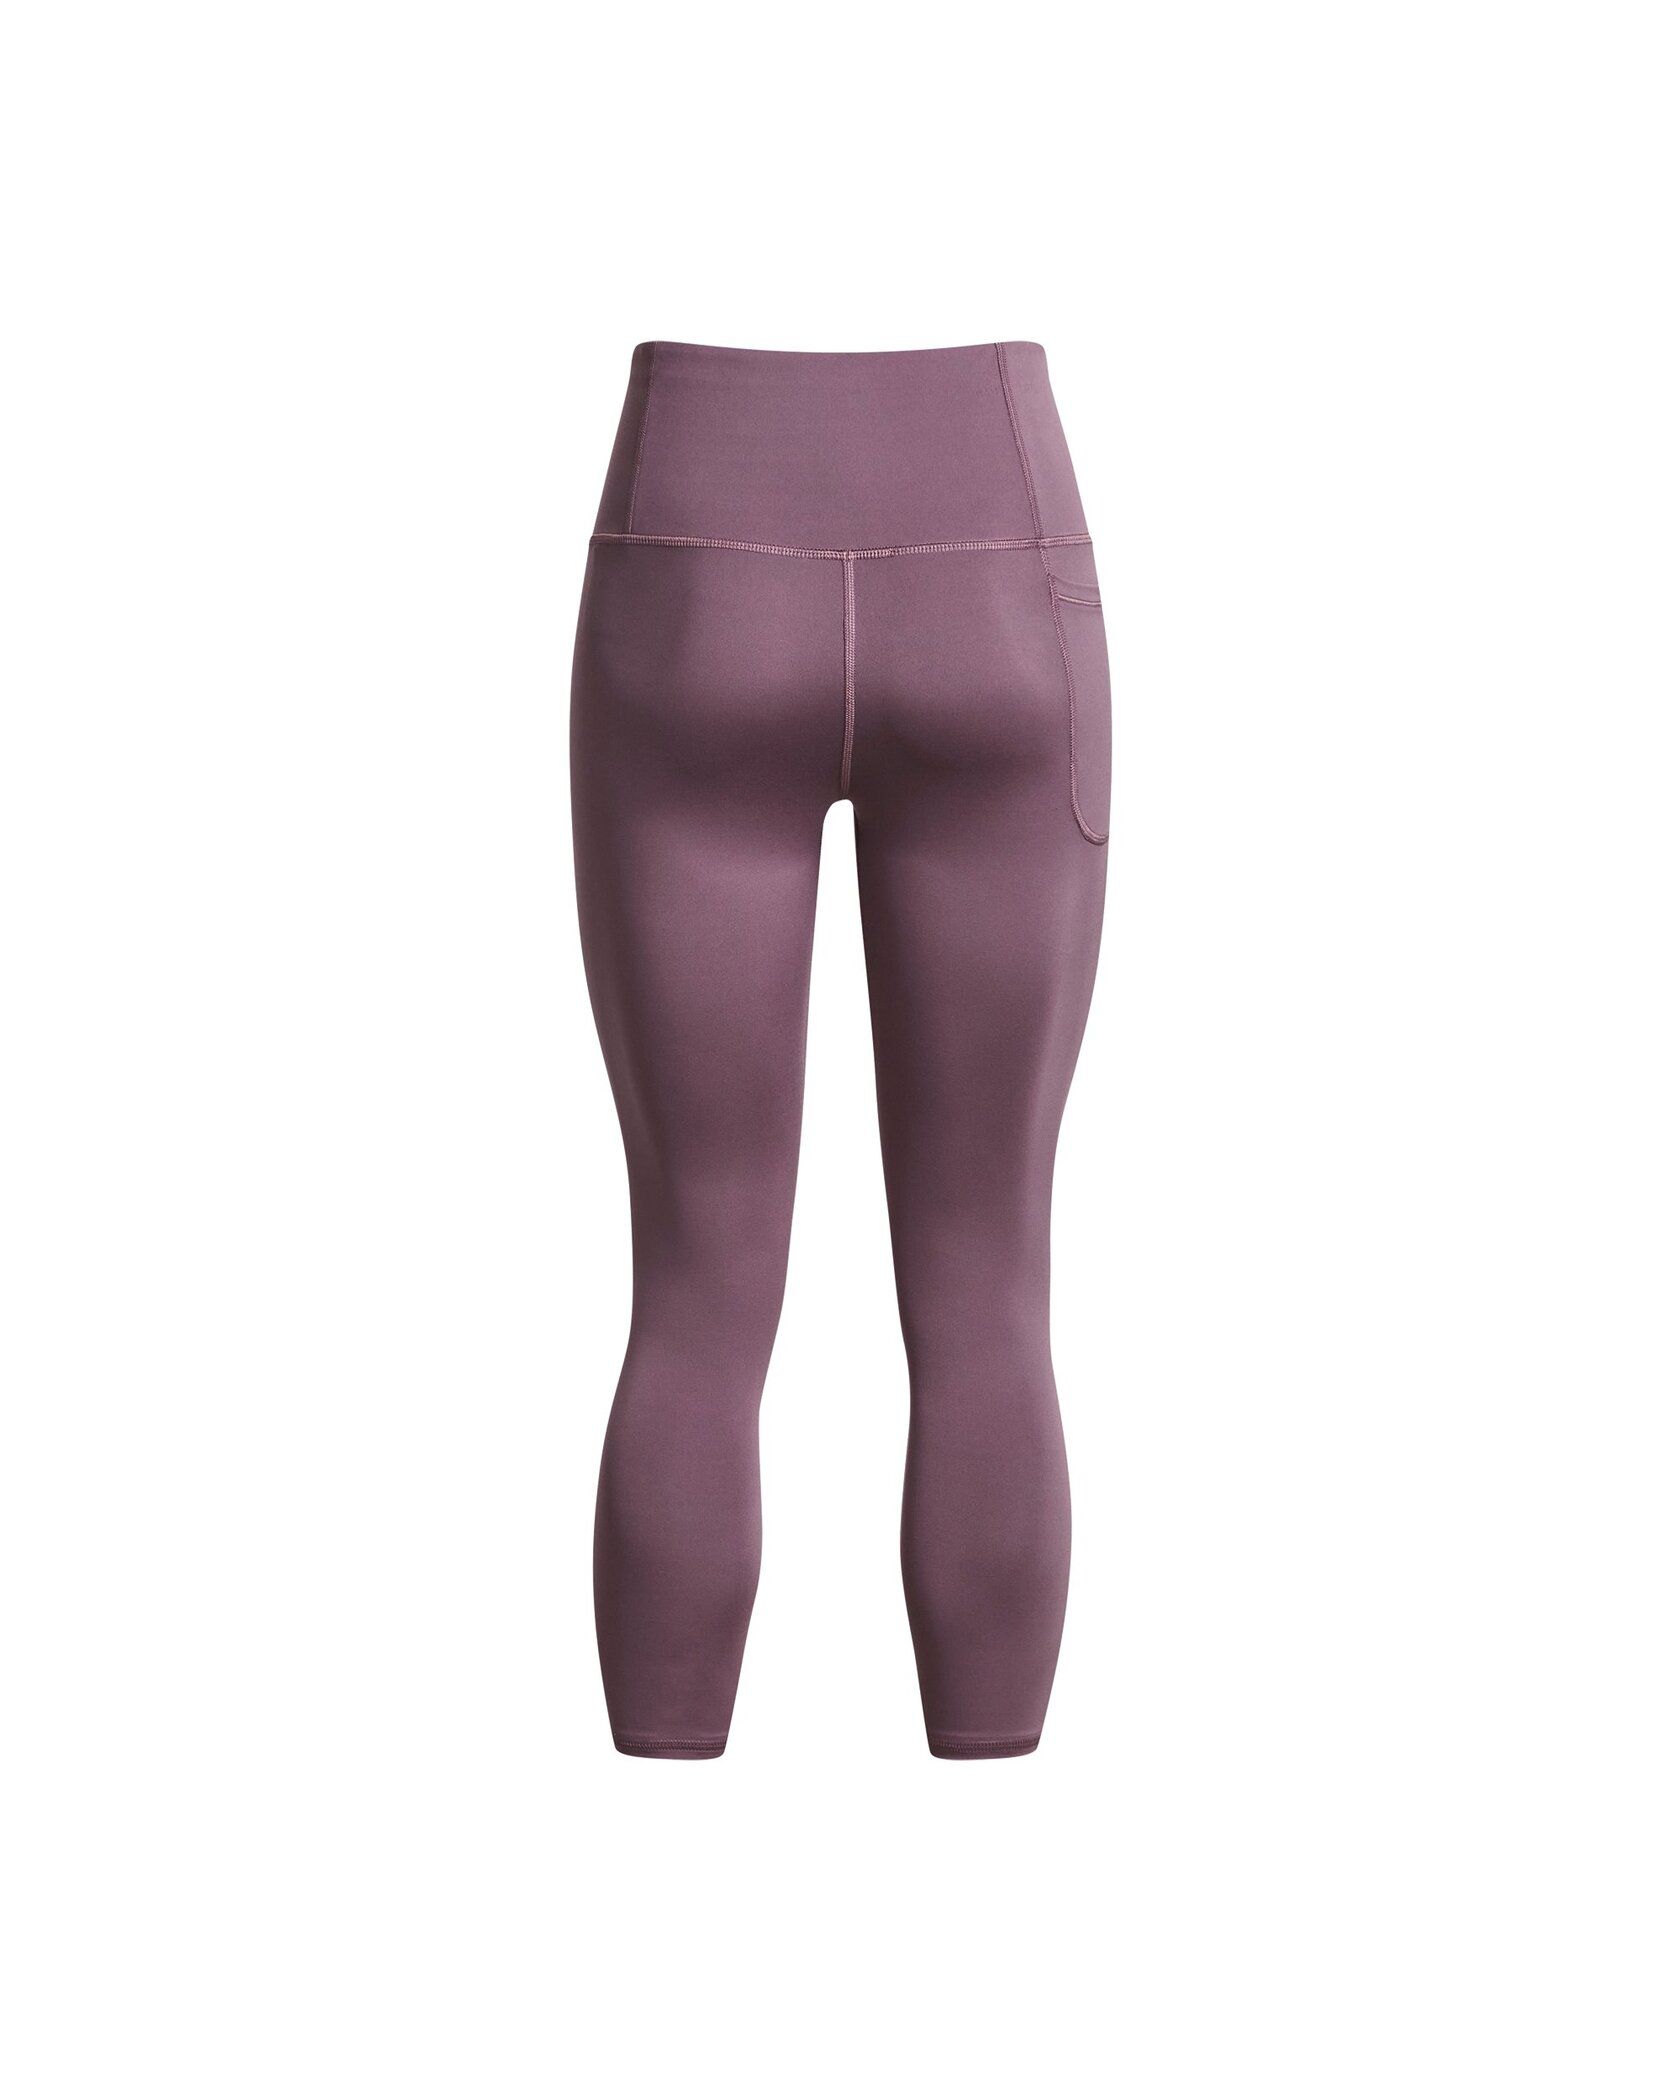 DABOOM Leggings for Women, High Waist and Non See-Through, Ankle